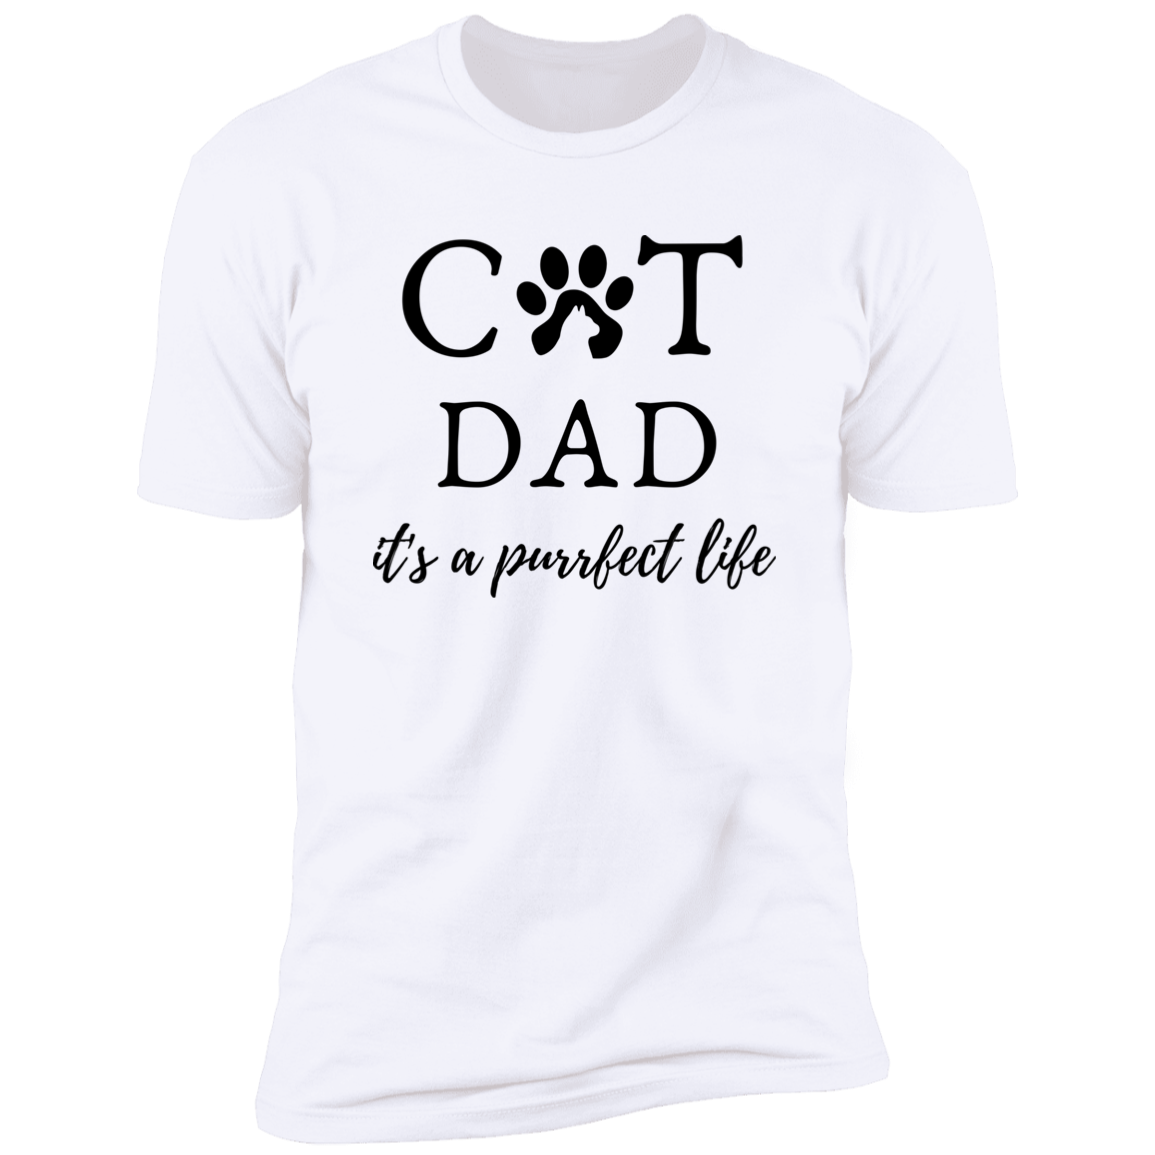 Cat Dad It's a Purrfect Life T-shirt, Cat Dad Shirt for humans, in white